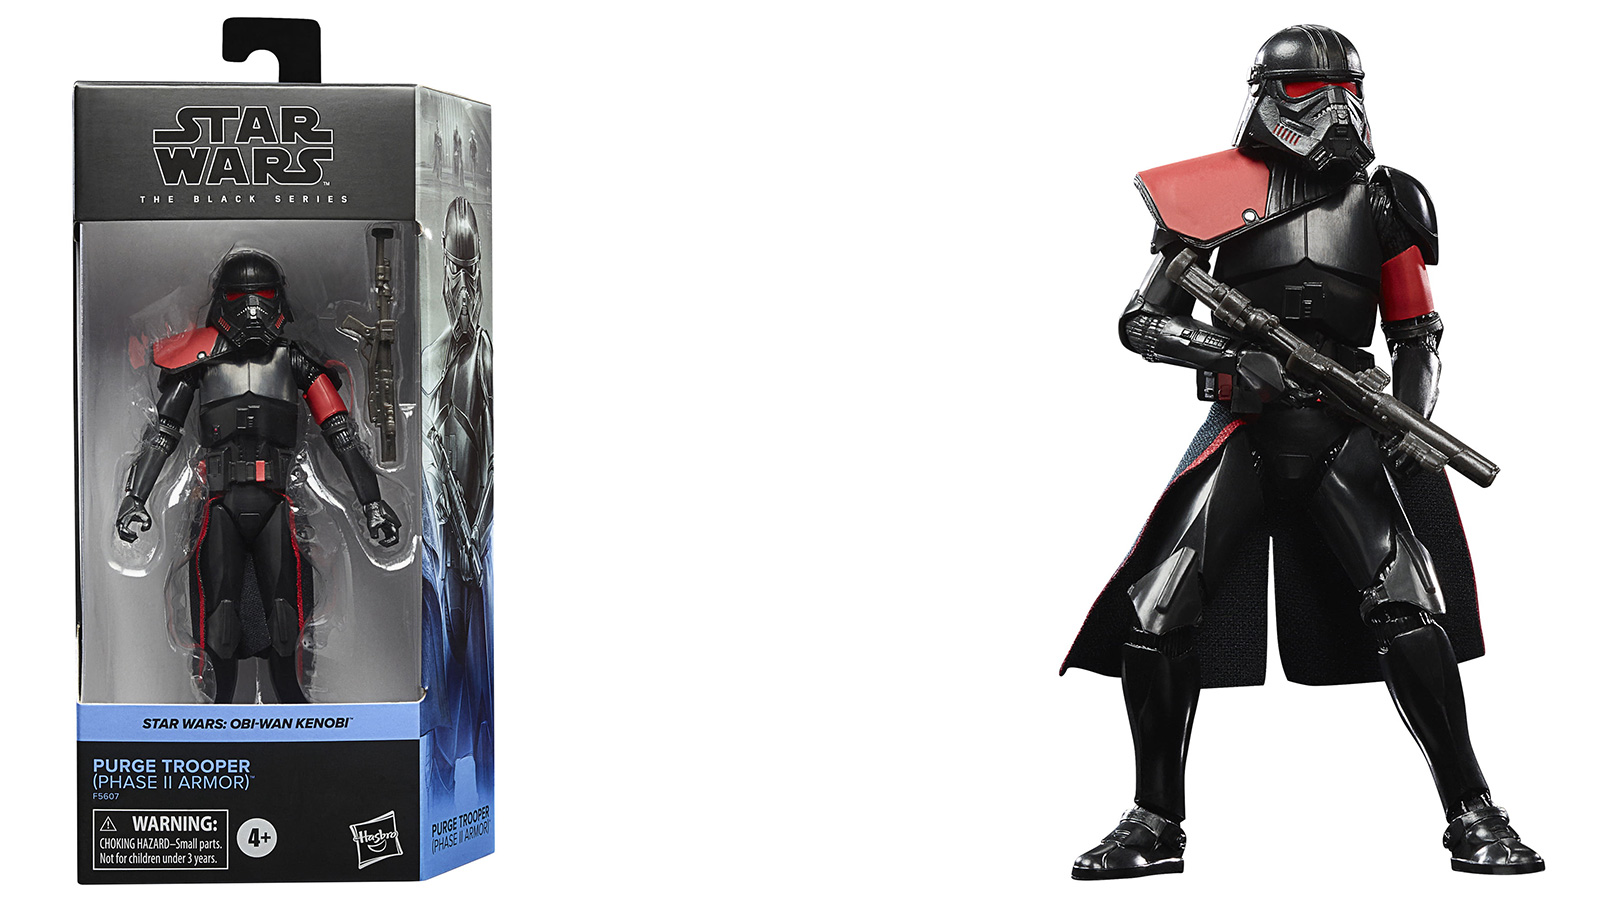 In Stock At Walmart - Exclusive TBS 6-Inch Purge Trooper (Phase II Armor)